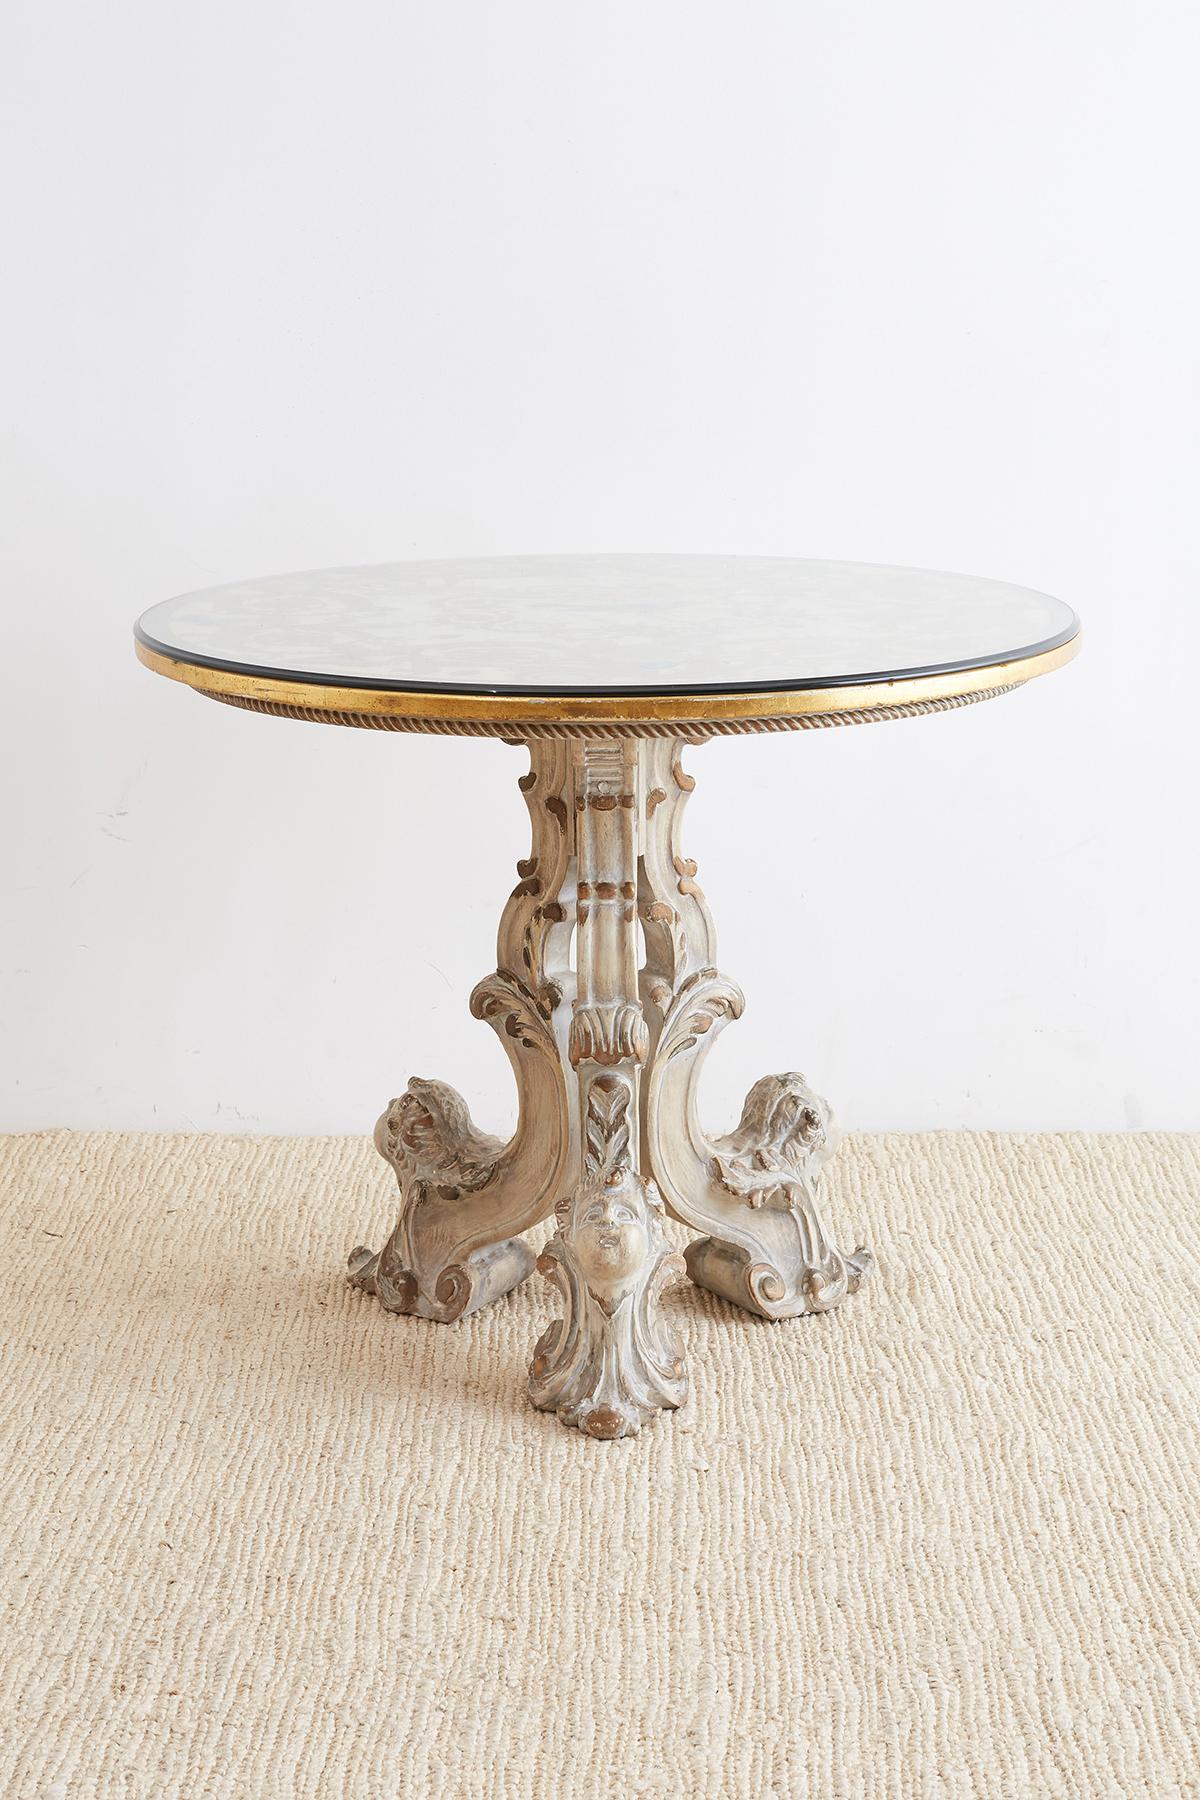 Hand-Carved Italian Neoclassical Painted Marble-Top Centre Table